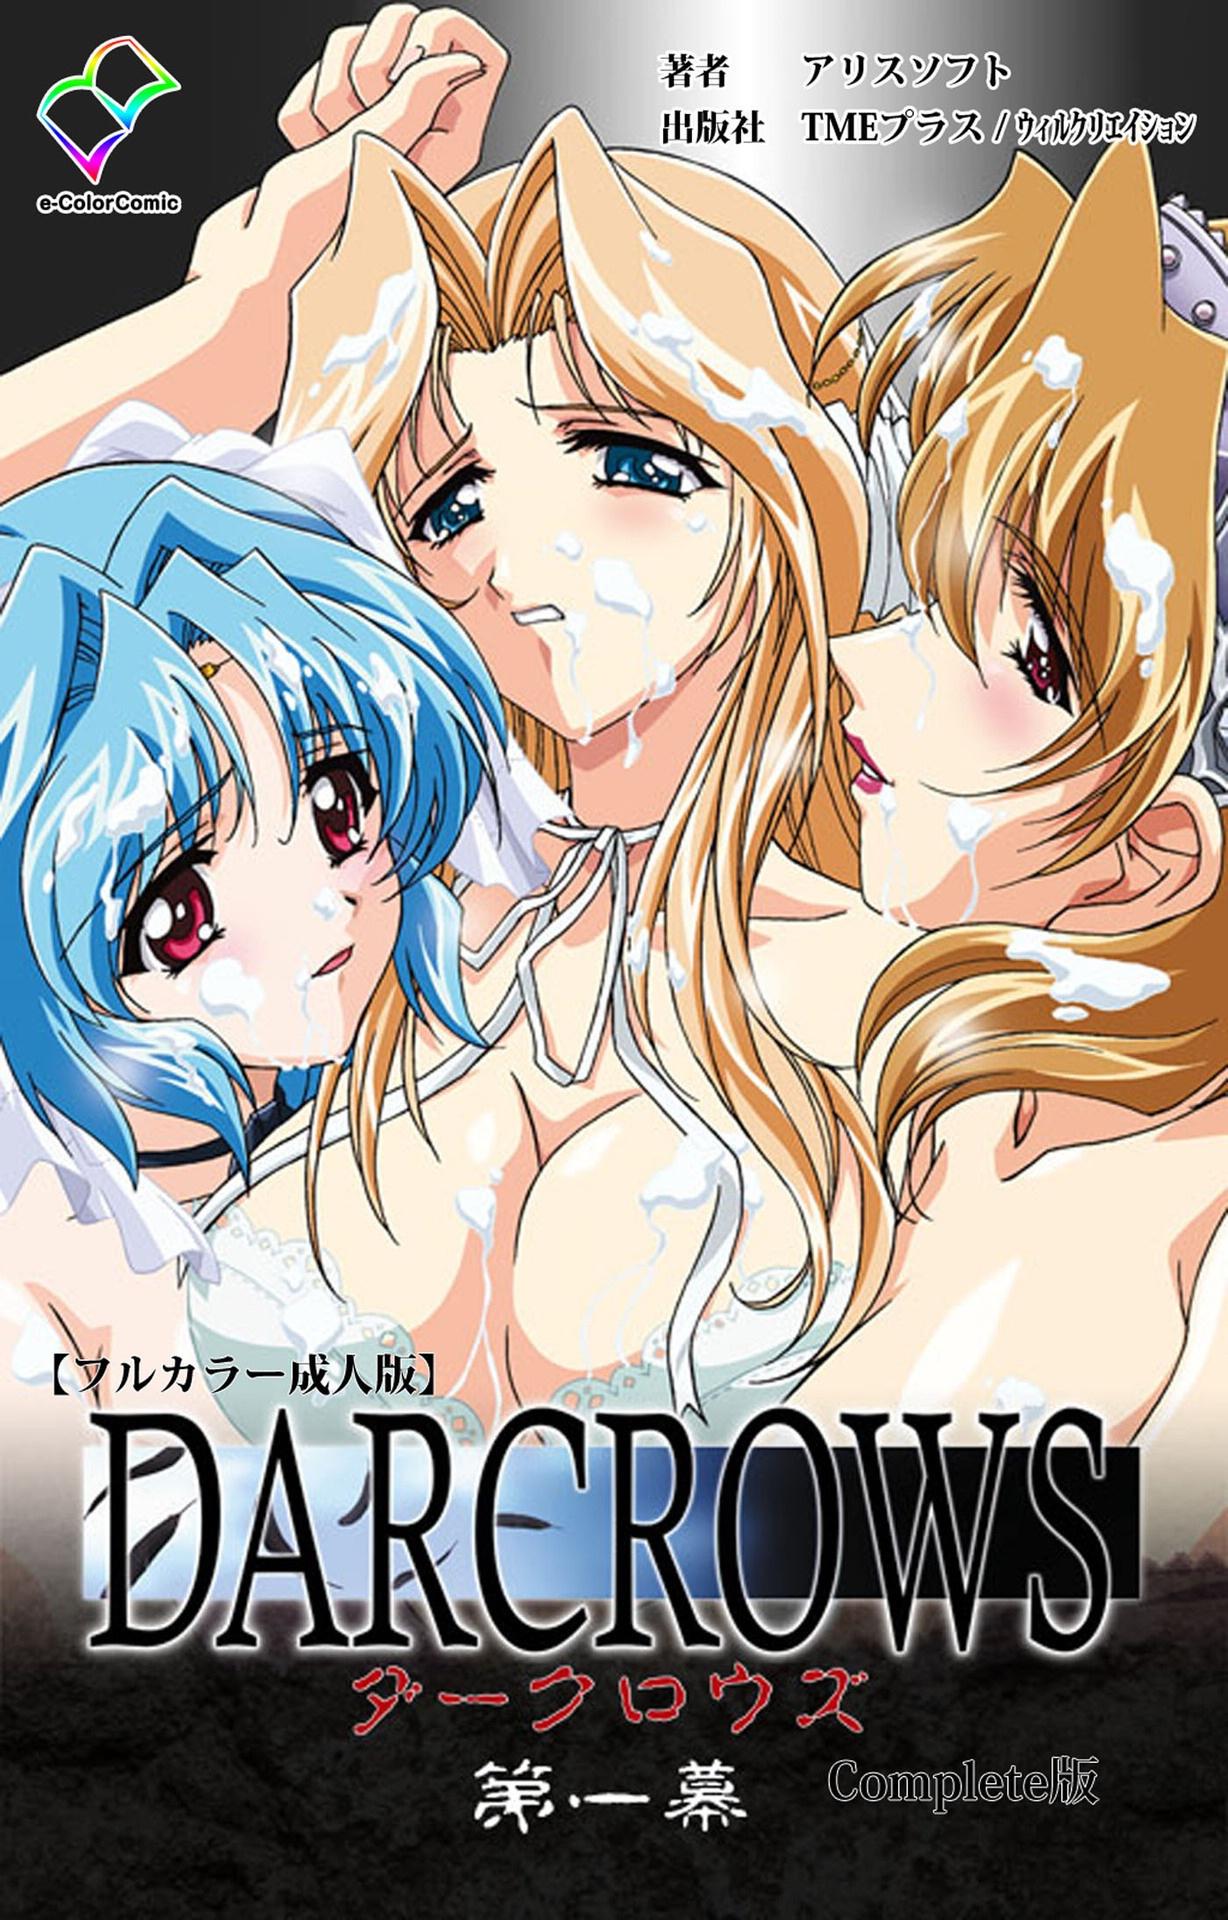 Guy DARCROWS Daiichimaku Complete Ban Tiny Tits Porn - Picture 1